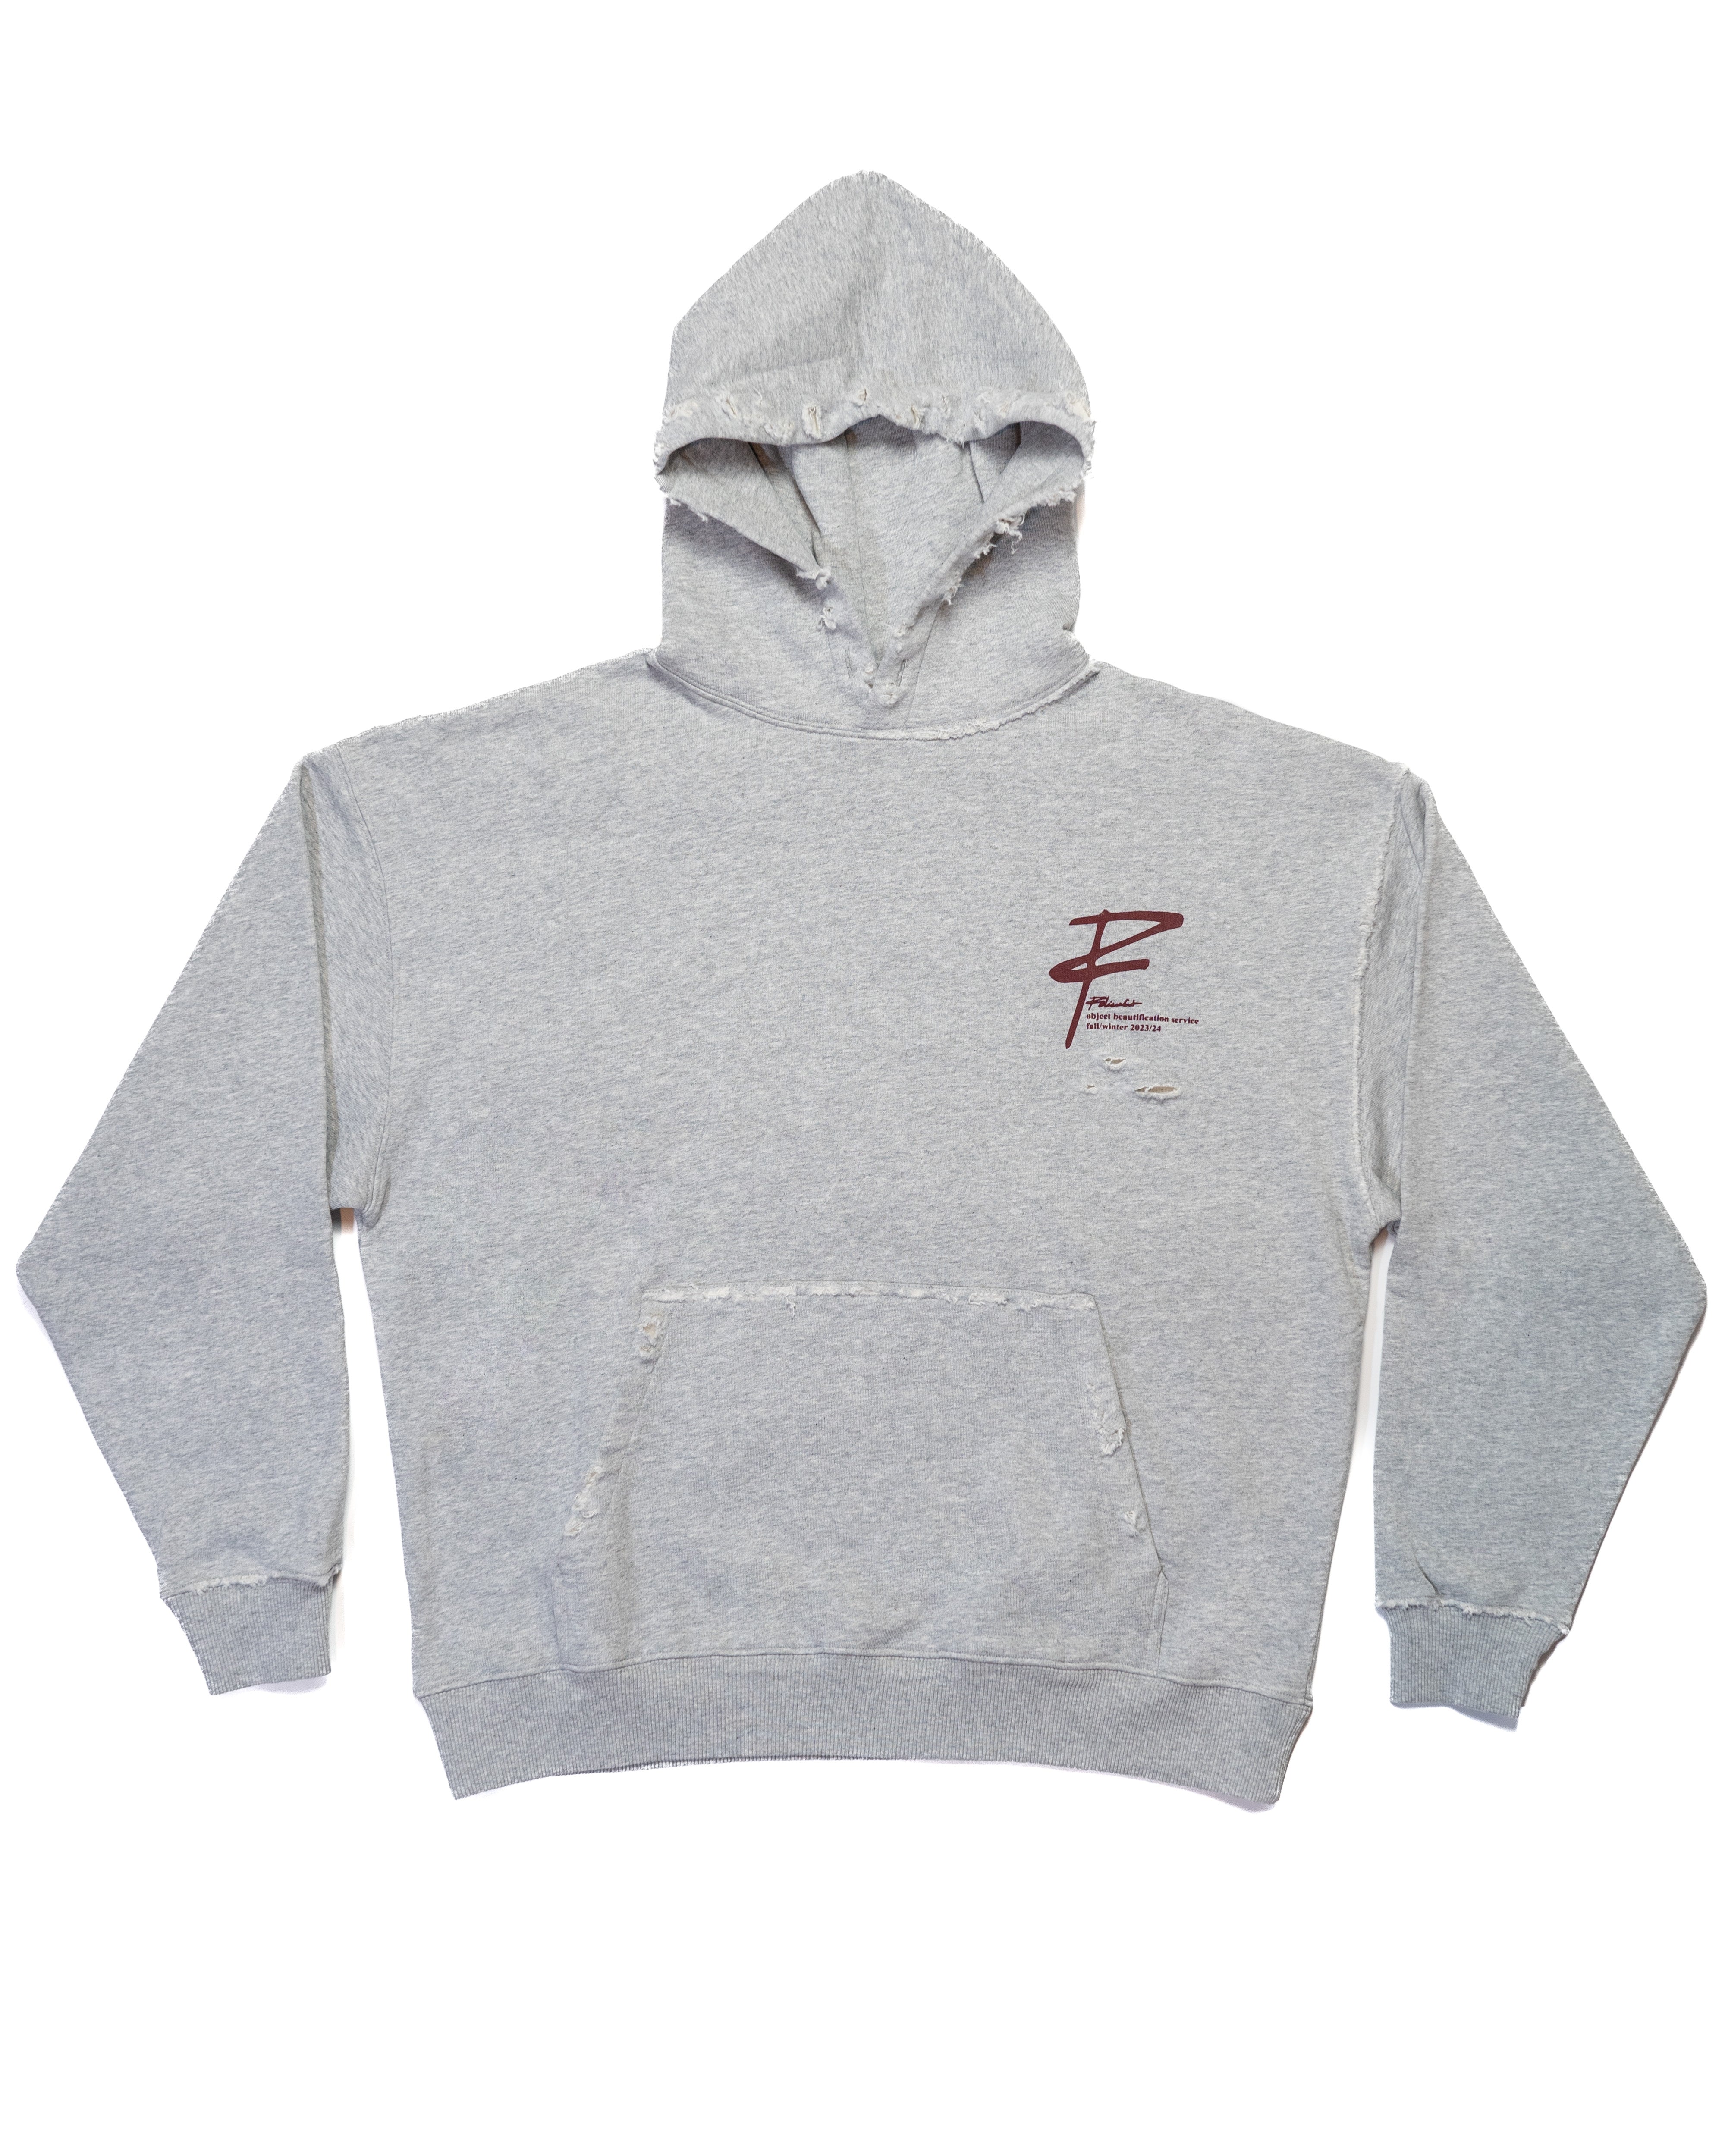 DISTRESSED THAT SOFT PINK MATTERS HOODIE